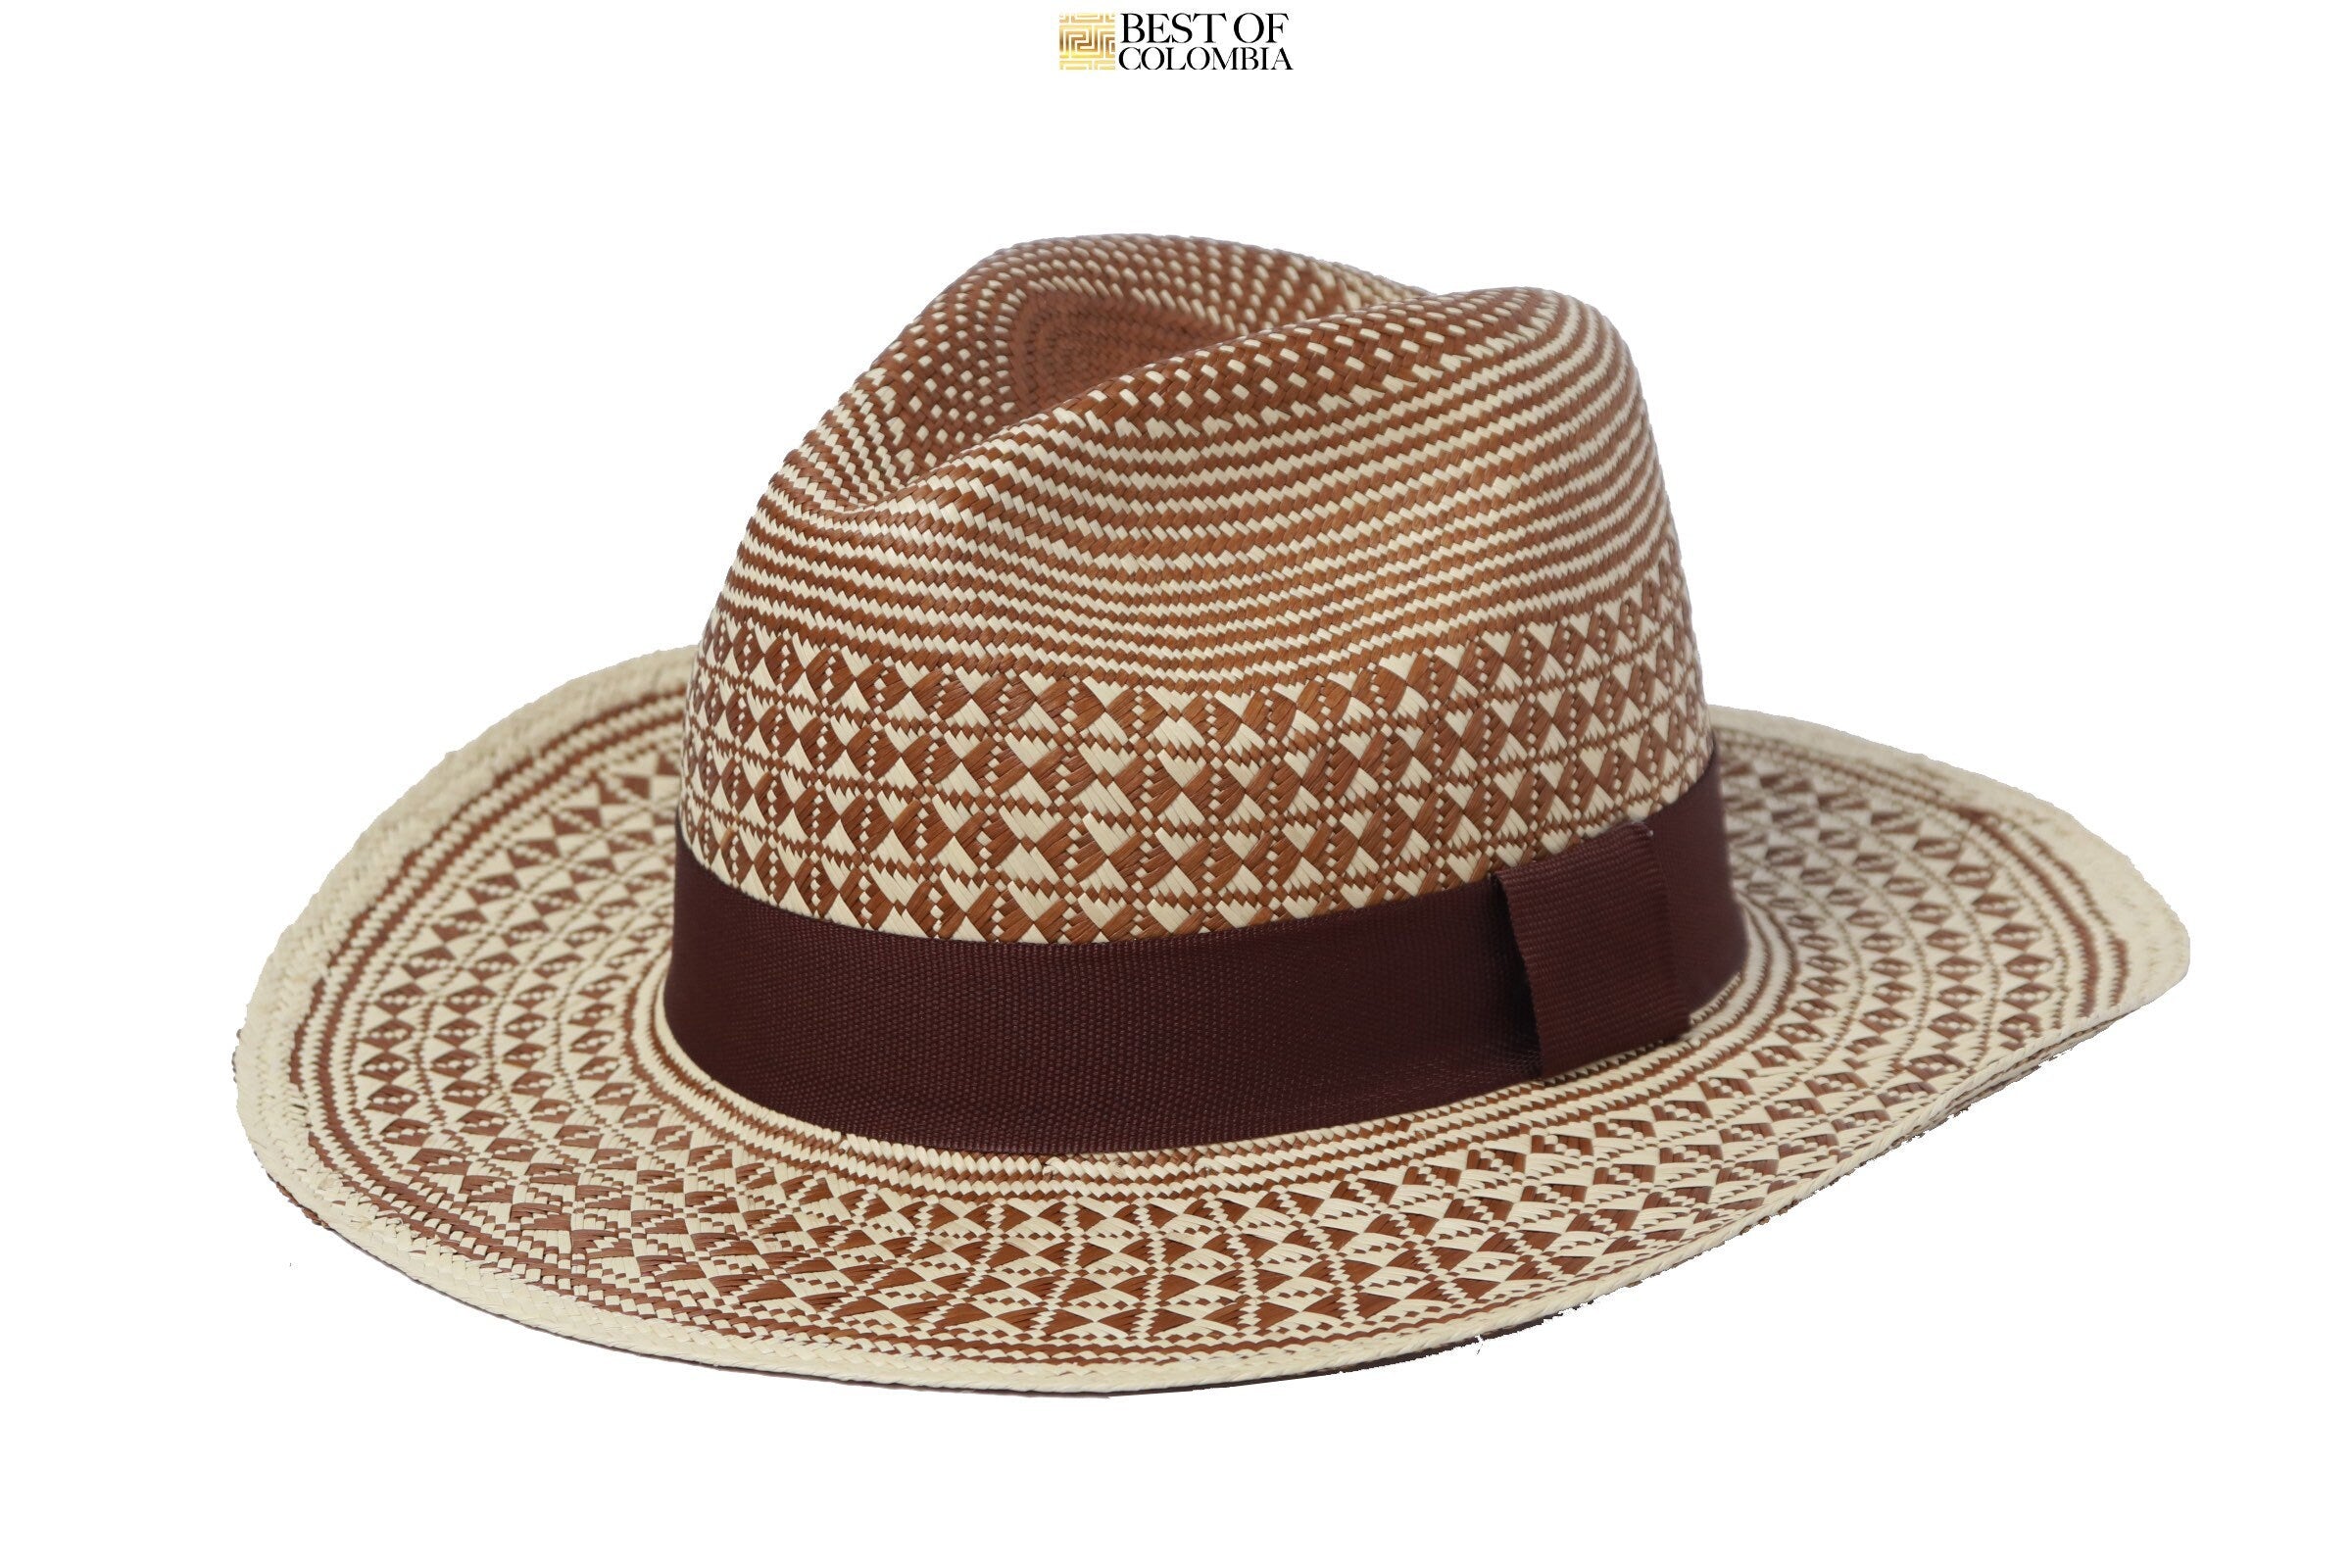 Vueltiao Panama Hat Style – Best of Colombia